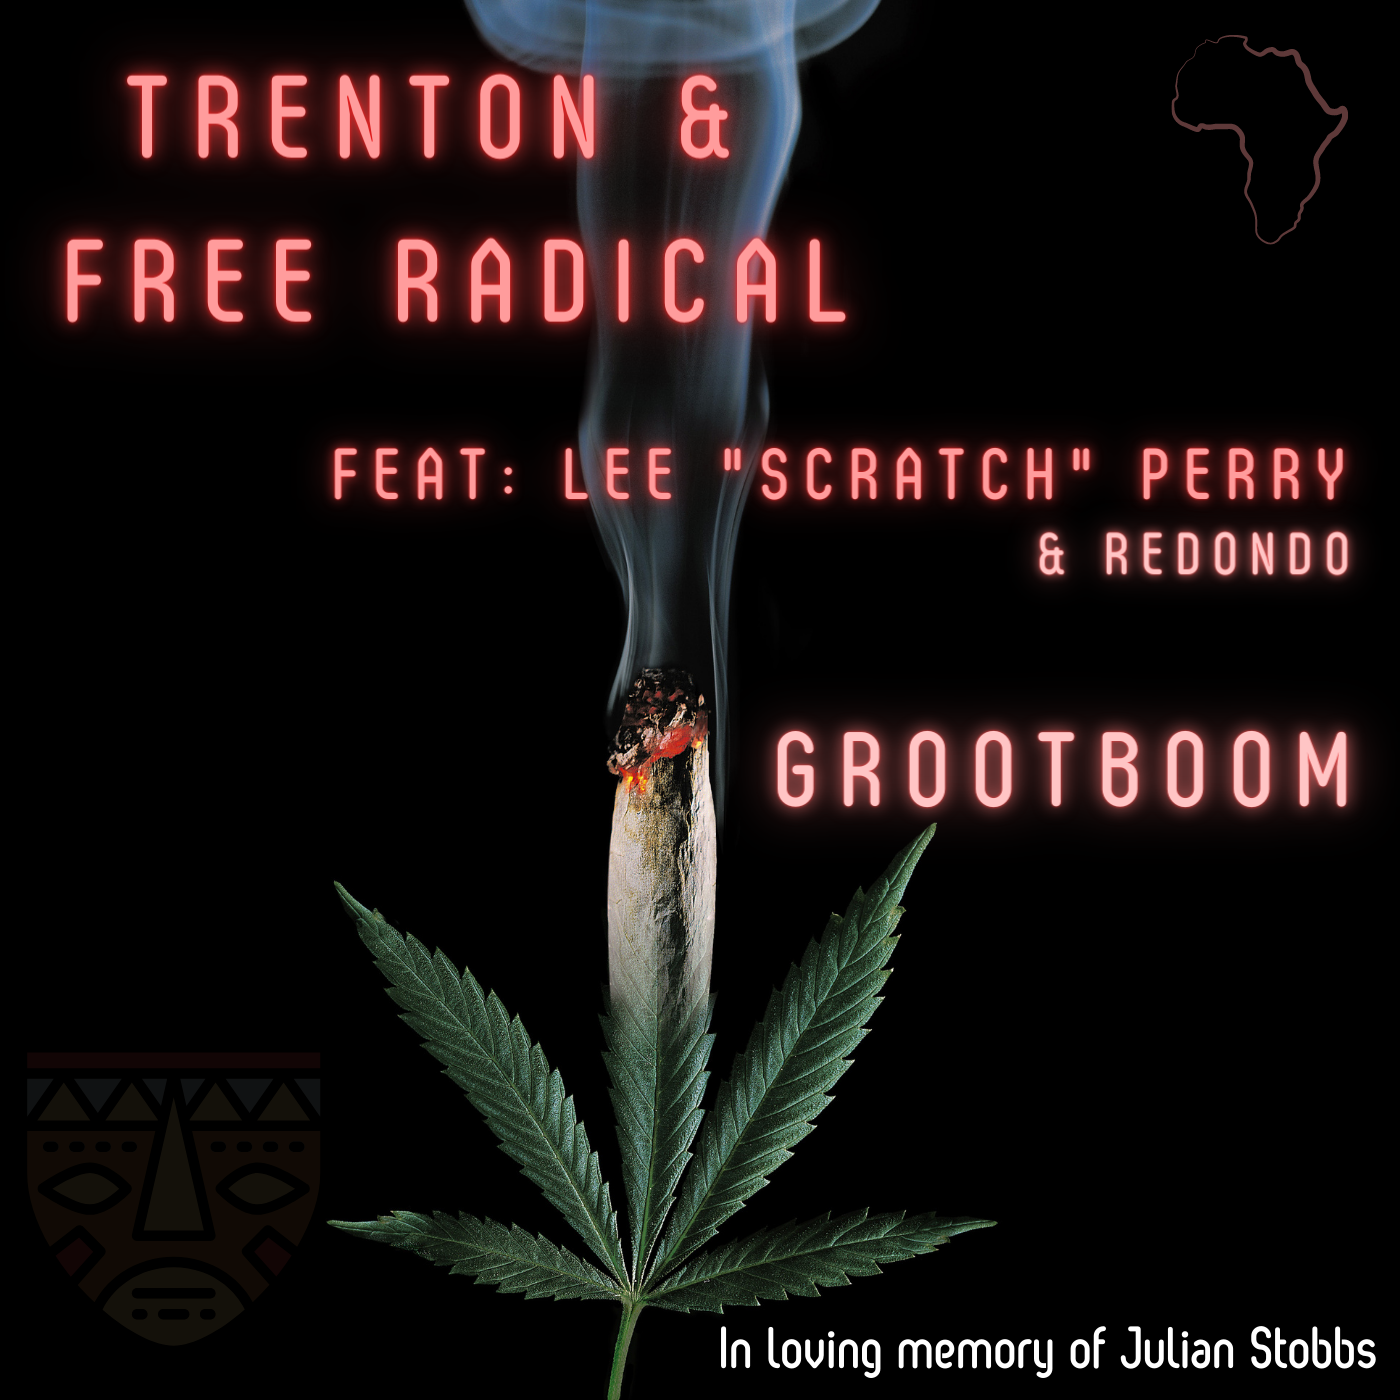 Musical tribute to the late cannabis activist Julian Stobbs by Trenton & Free Radical (video)